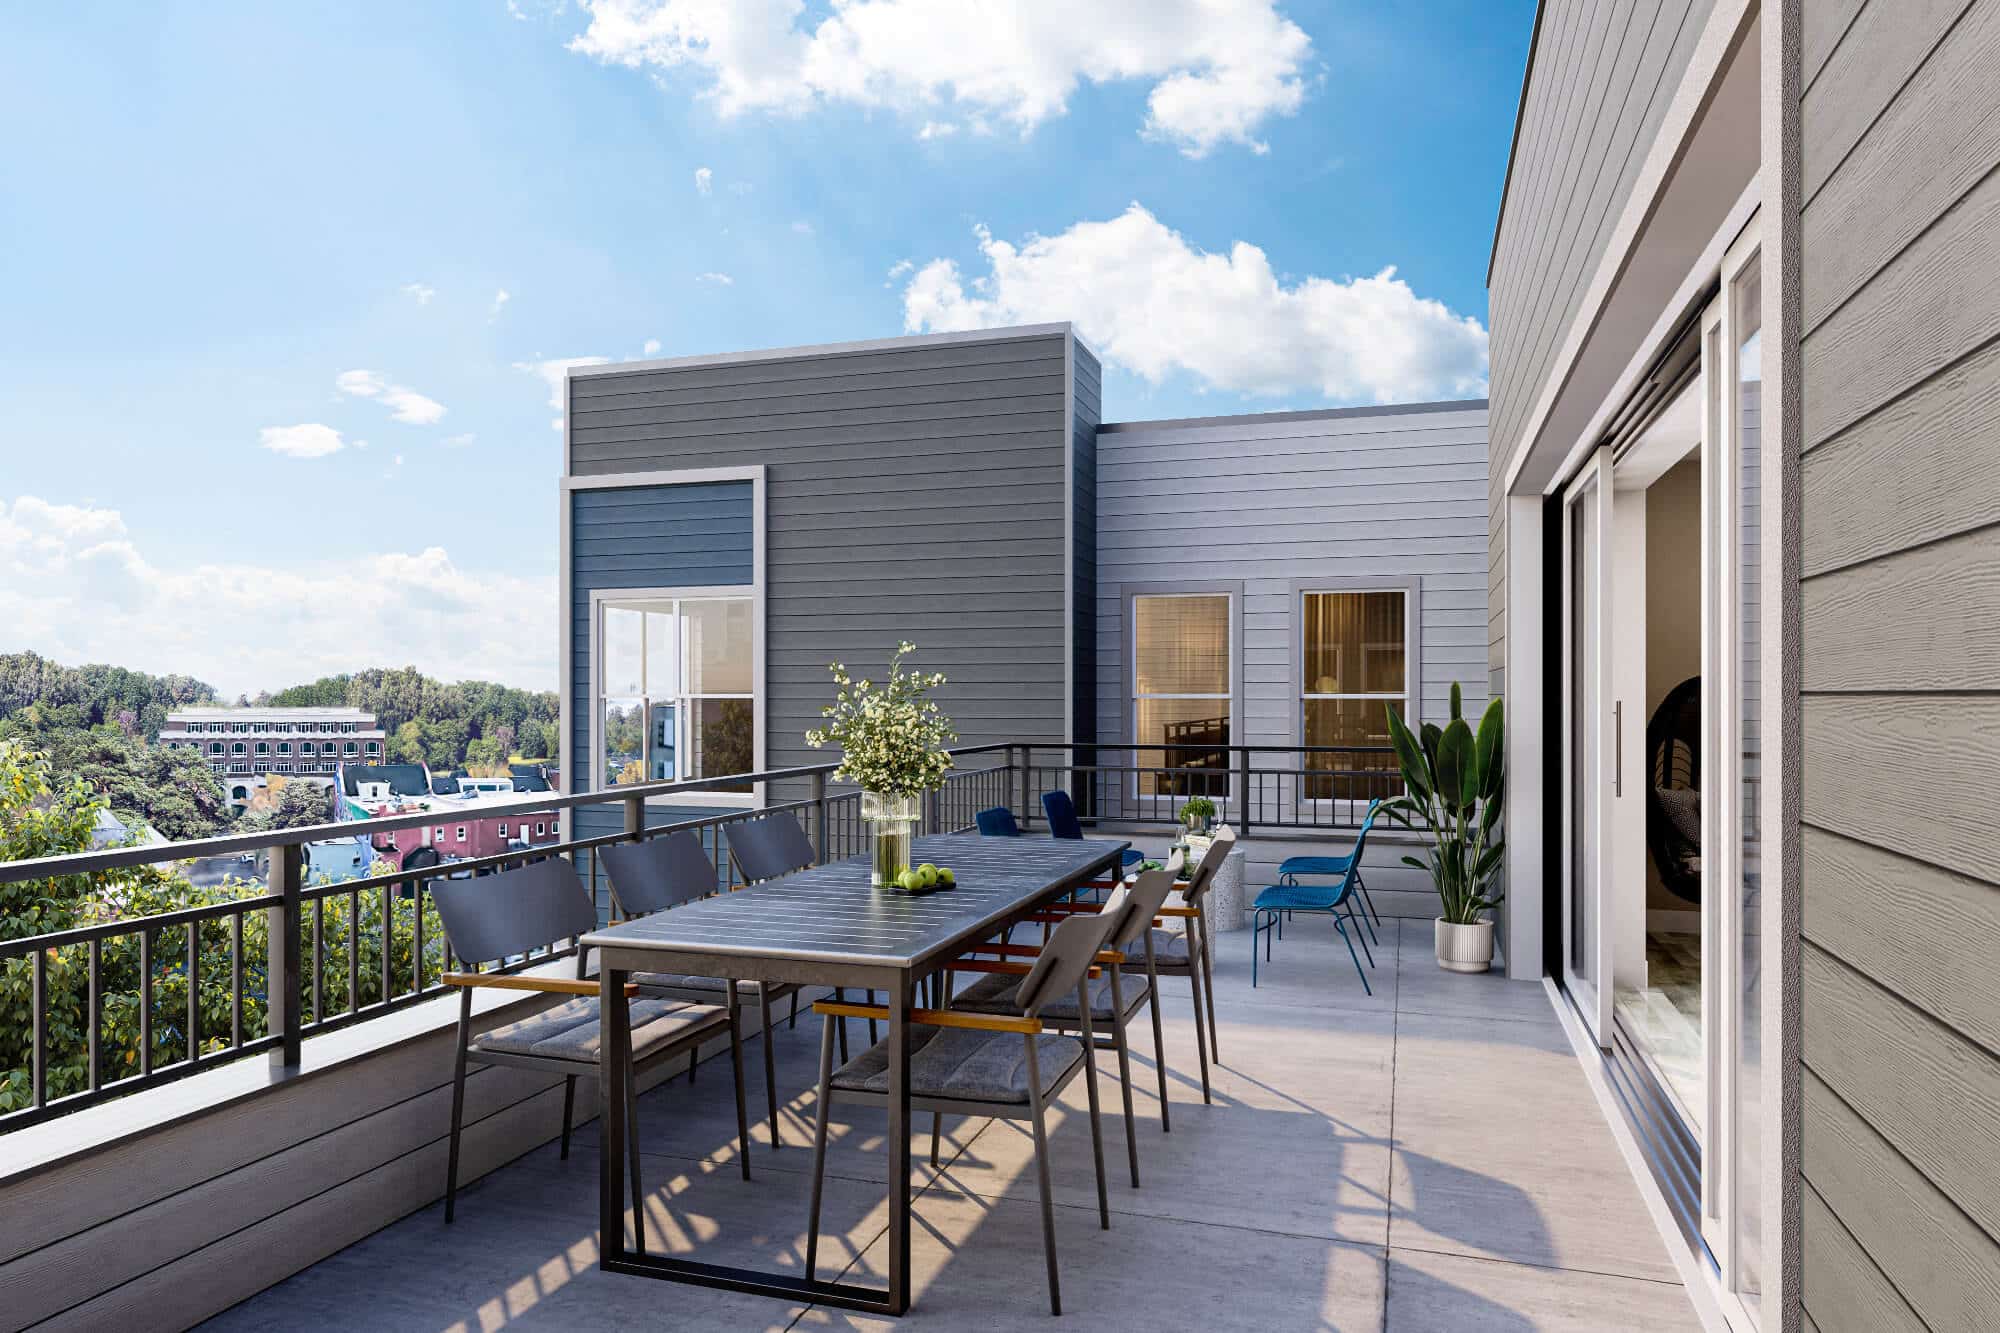 the edition on rosemary new luxury off campus apartments near unc chapel hill community amenities the hub 3rd floor terrace